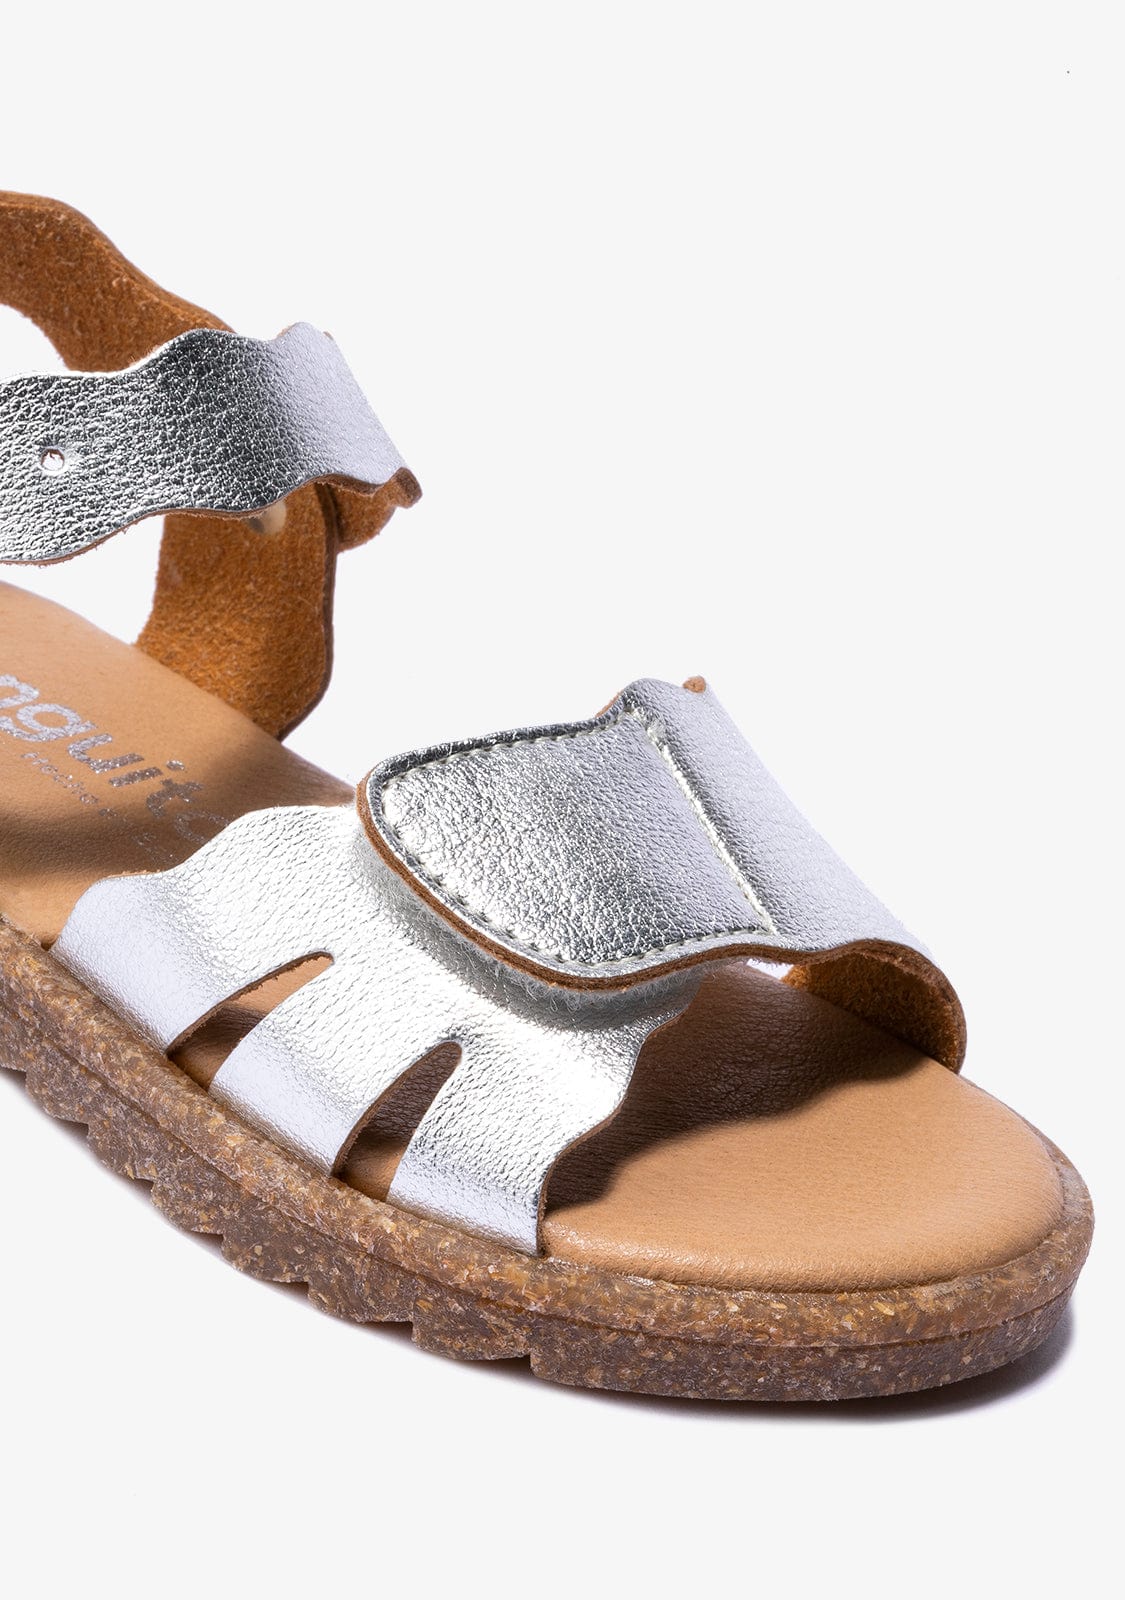 CONGUITOS Shoes Girl's Silver Adherent Strip Metallized Sandals